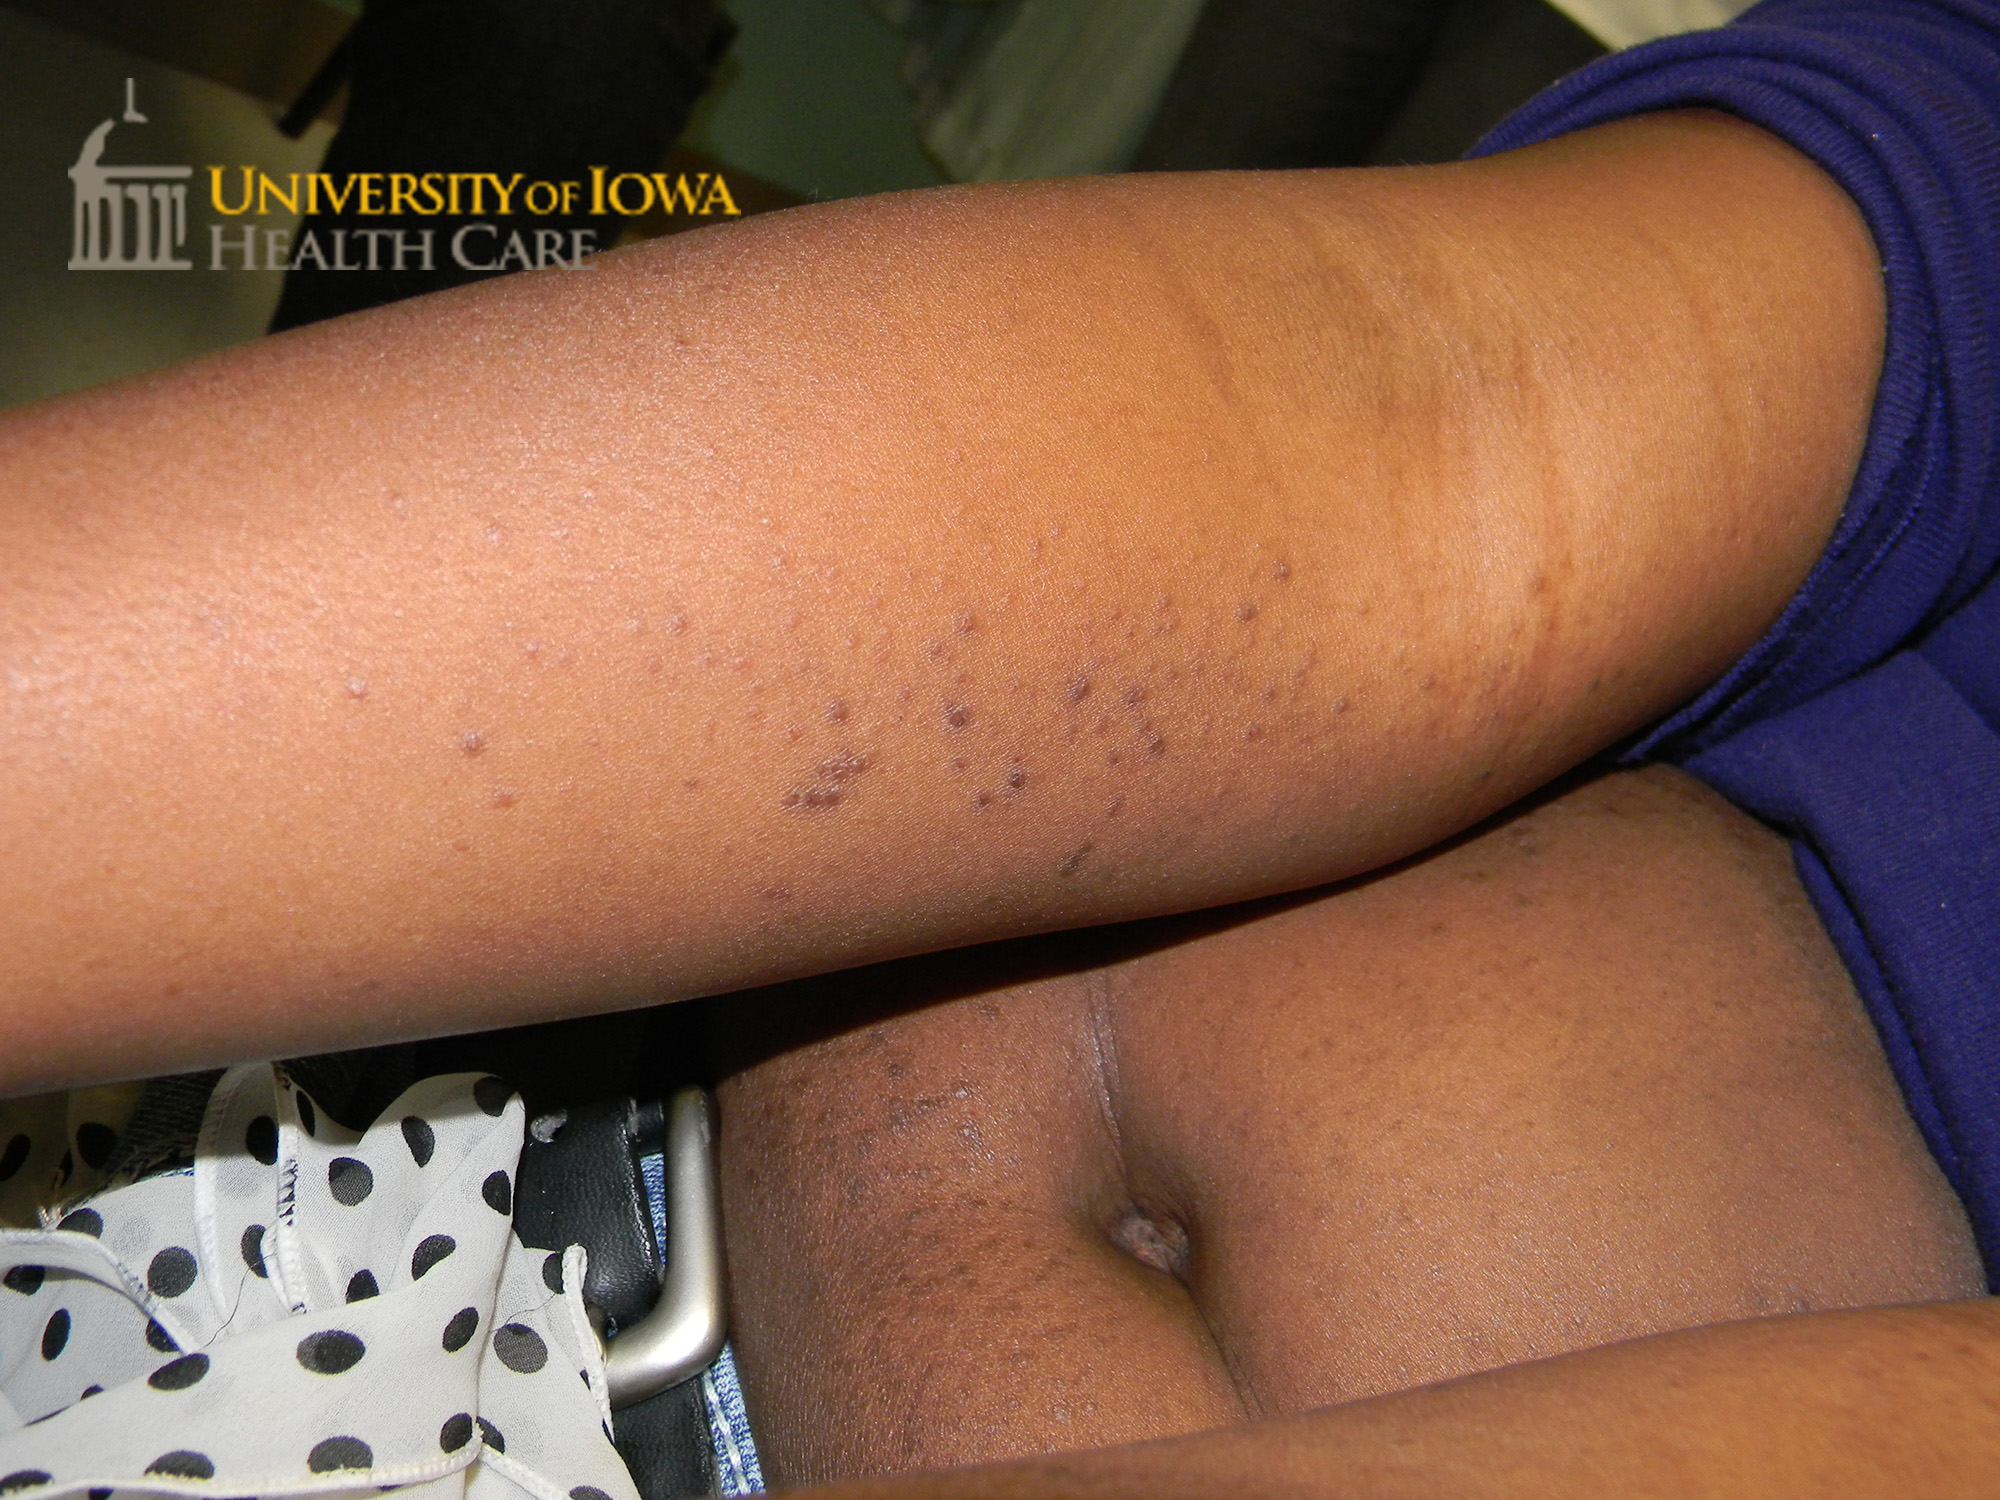 Hyperpigmented monomorphic papules on the trunk and arms. (click images for higher resolution).